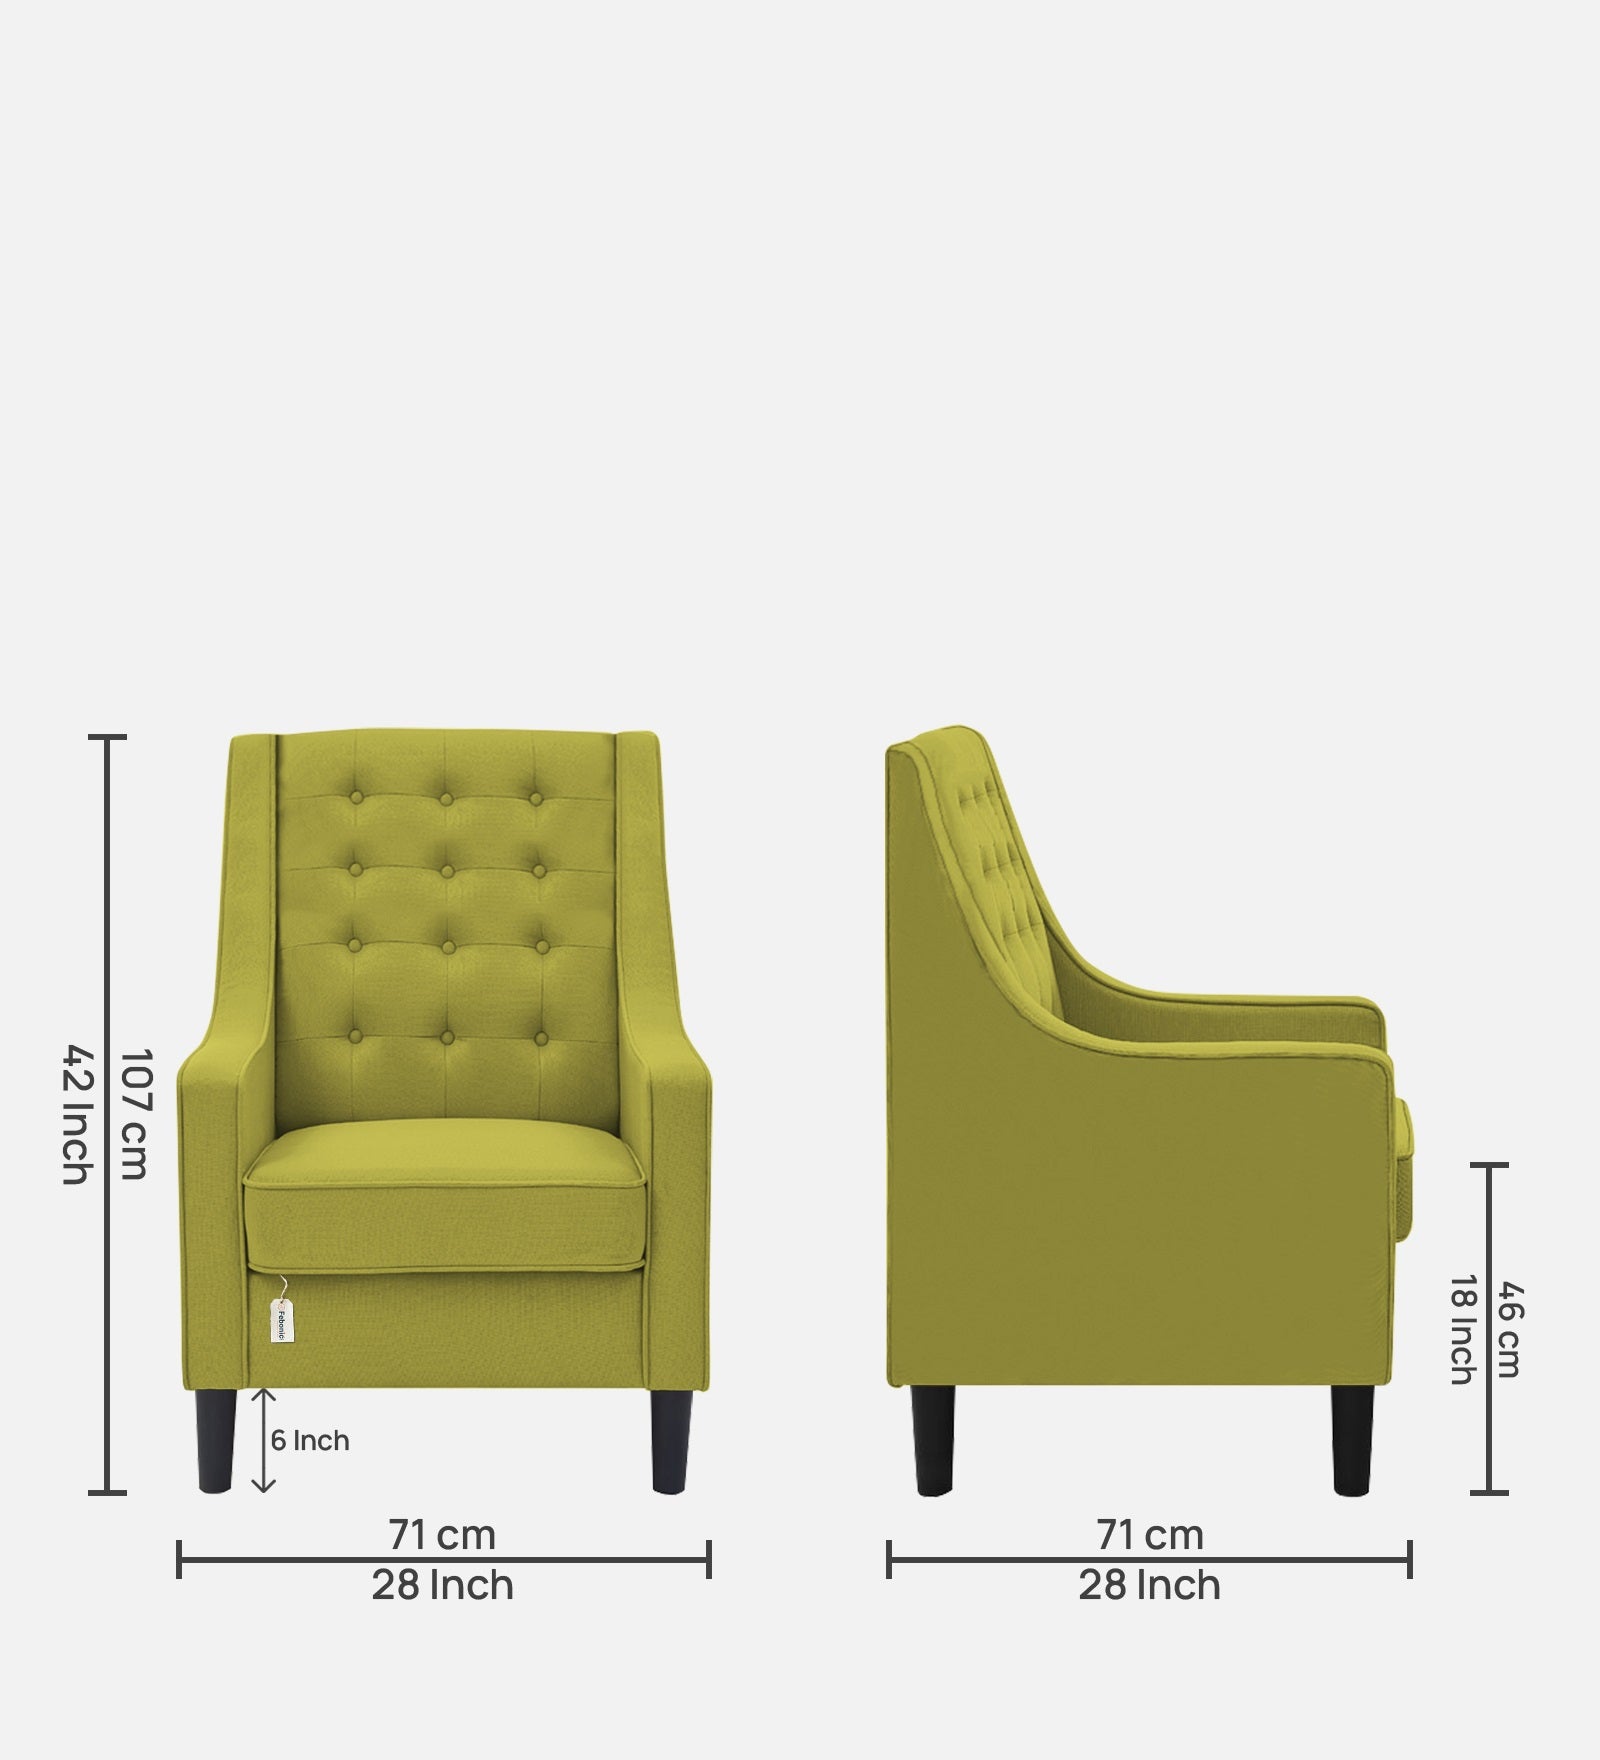 Sona Fabric Barrel Chair in Parrot Green Colour